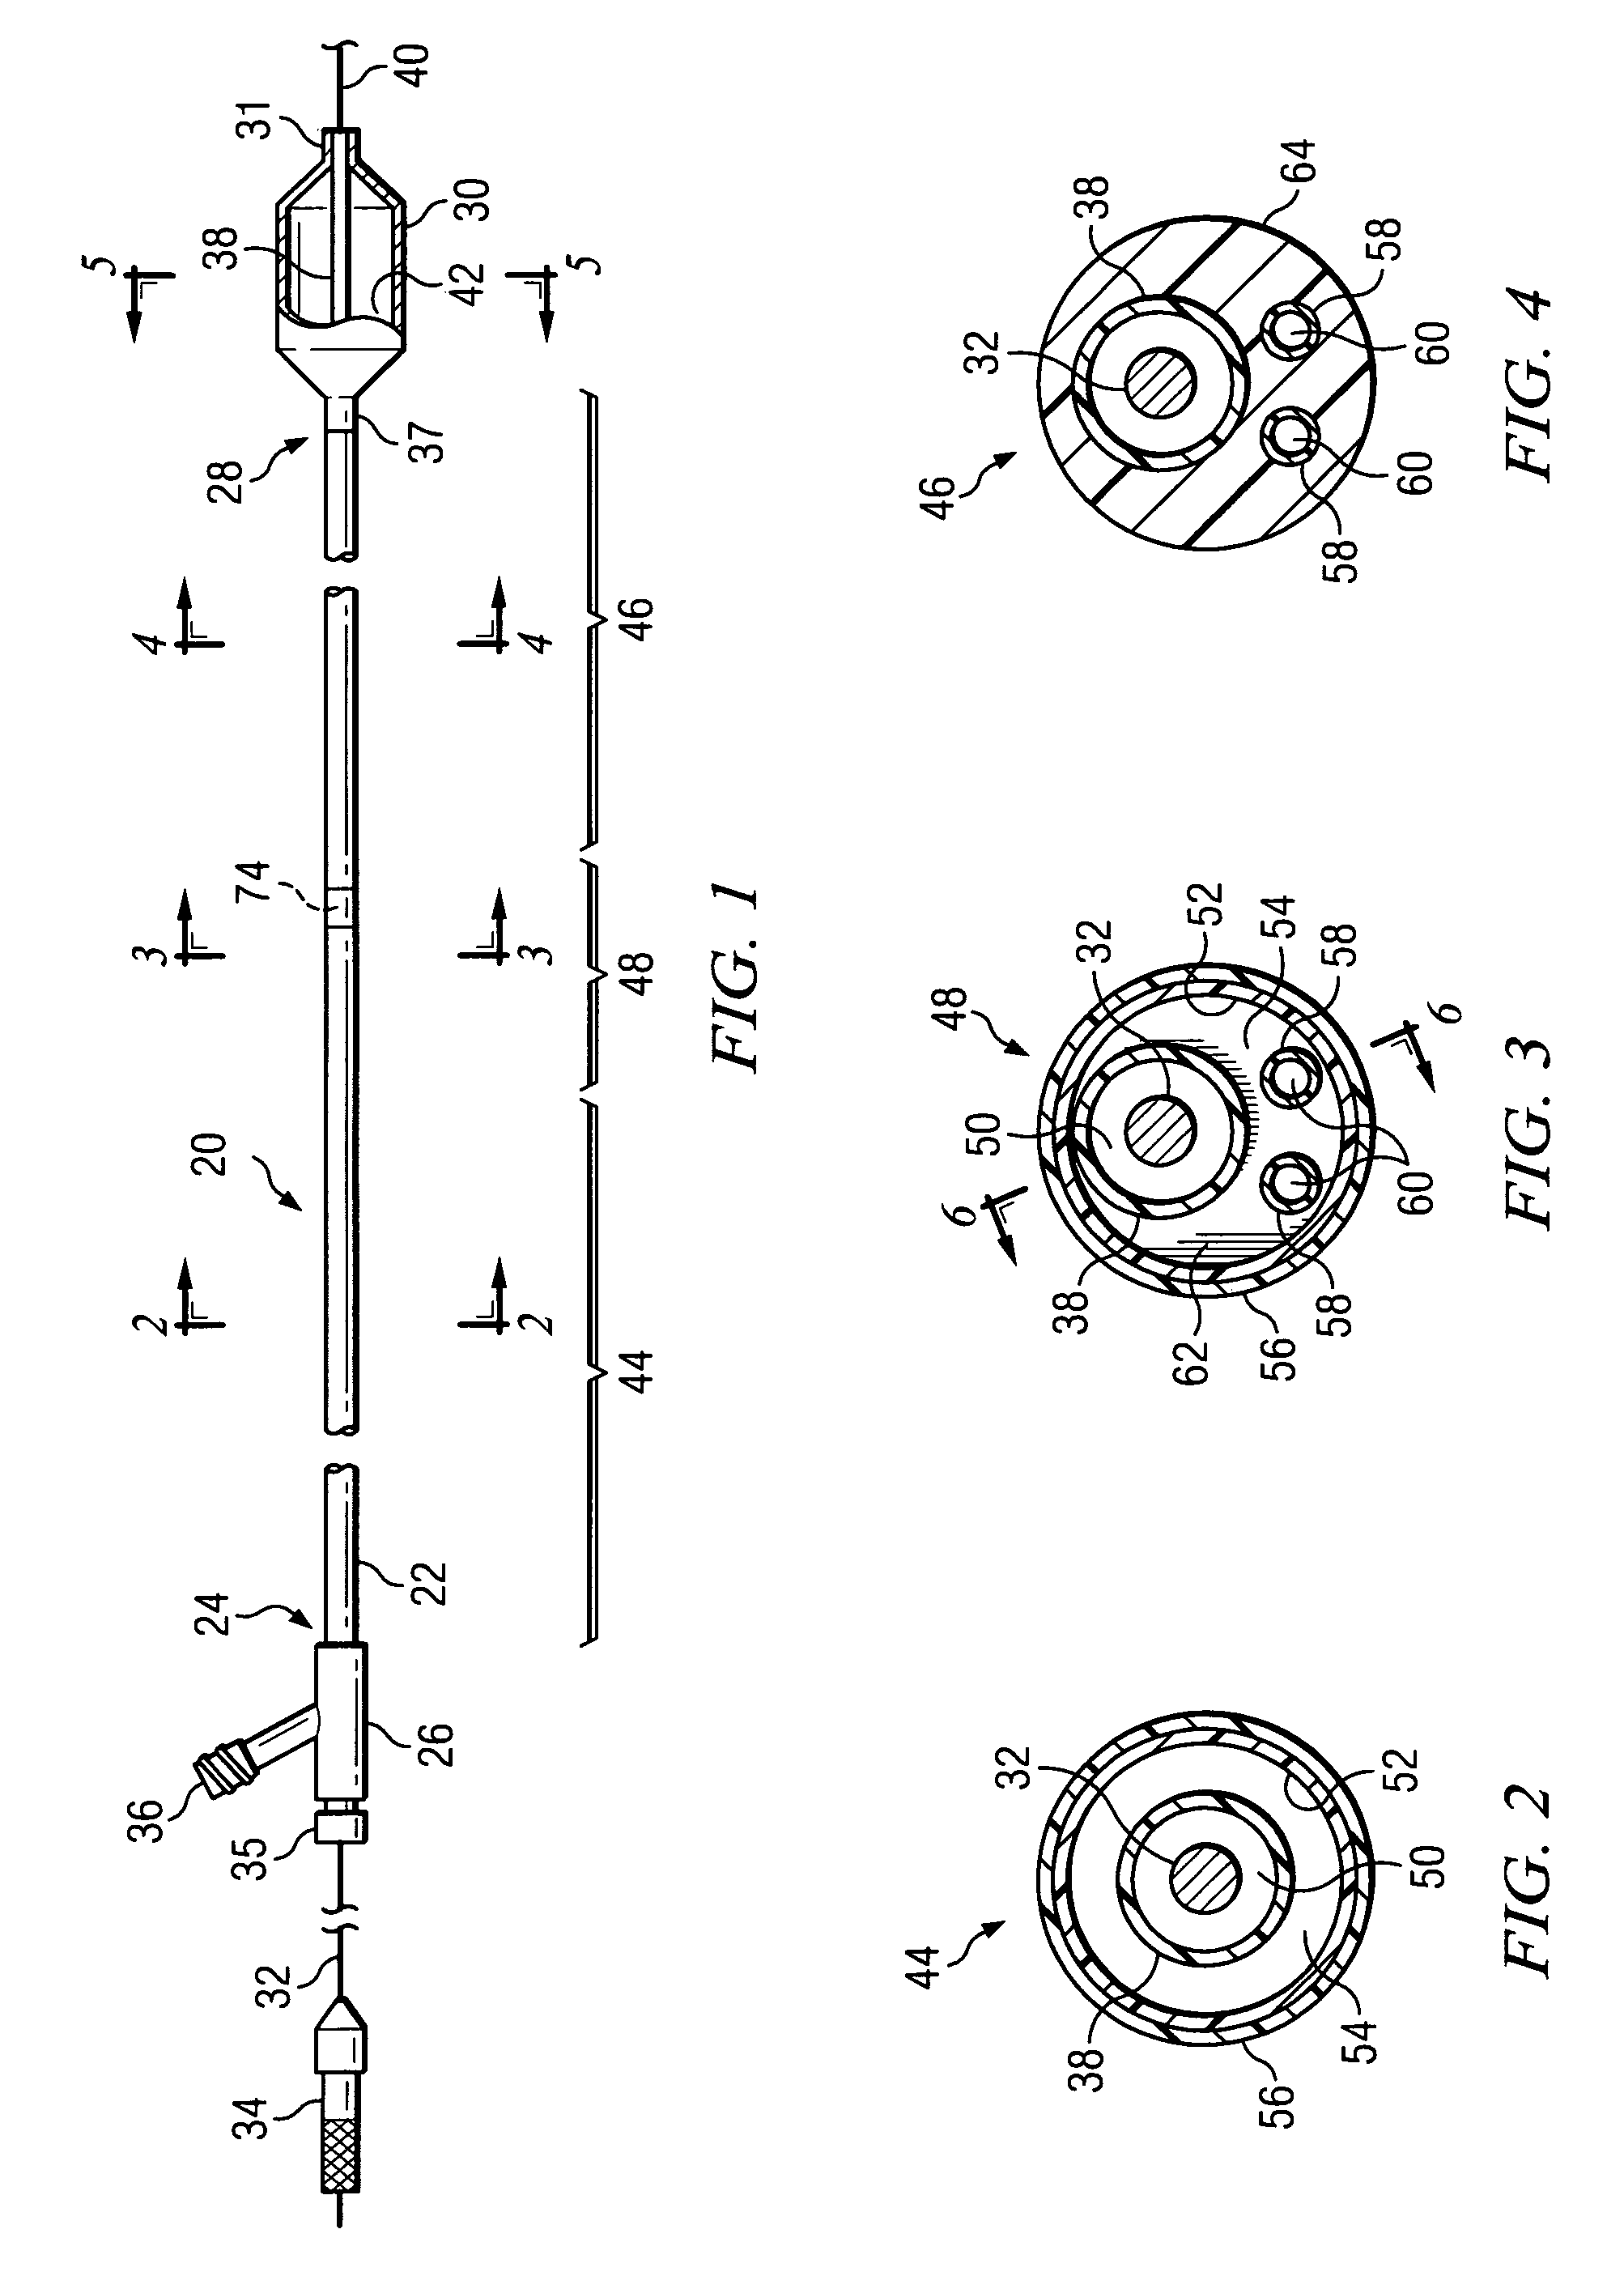 Balloon dilation catheter having transition from coaxial lumens to non-coaxial multiple lumens